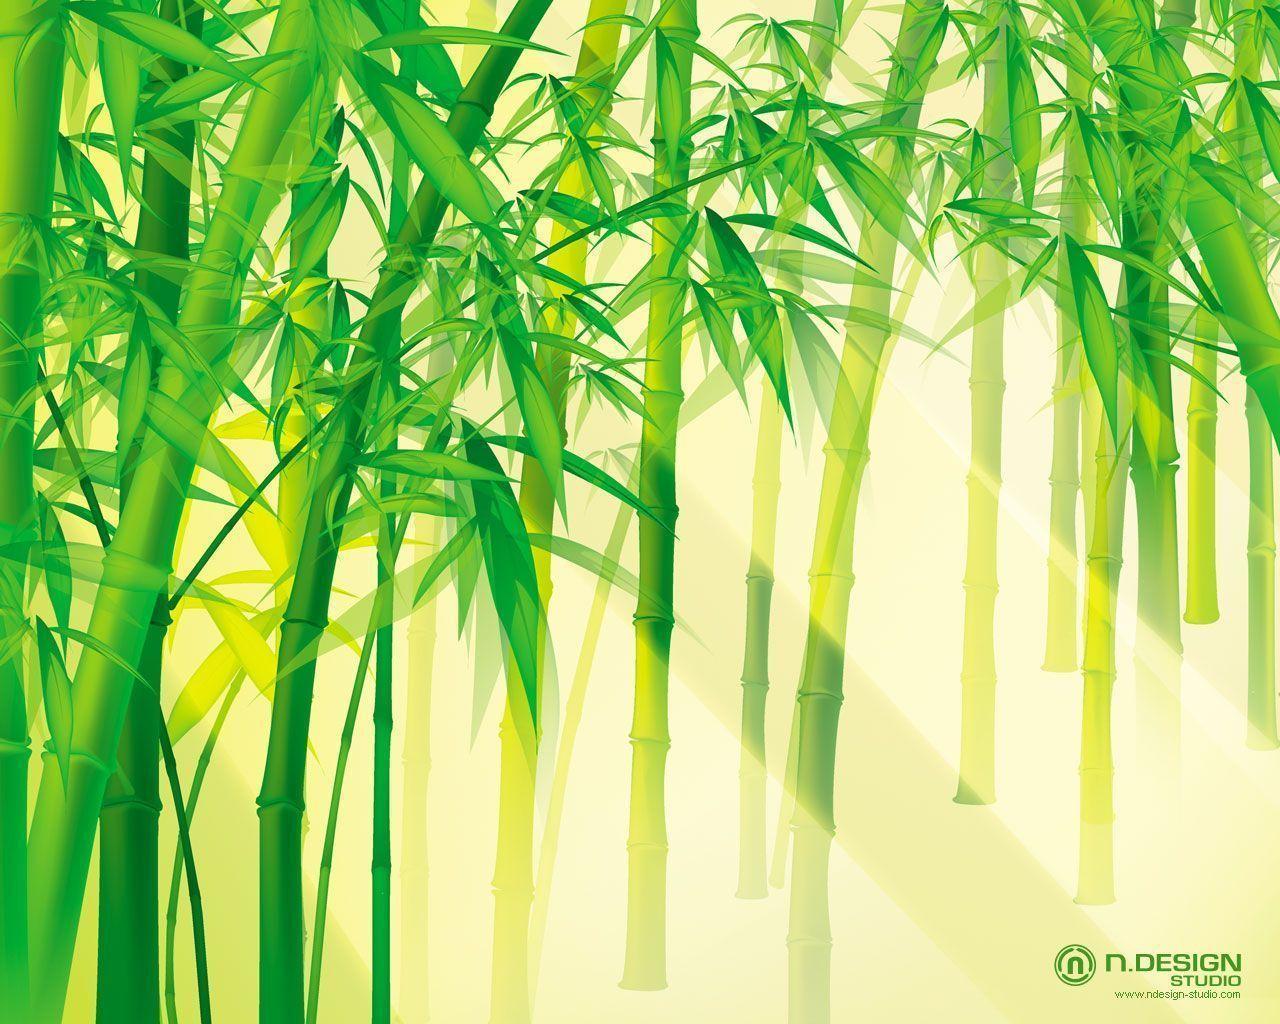 pic new posts: Wallpaper Bamboo Pattern